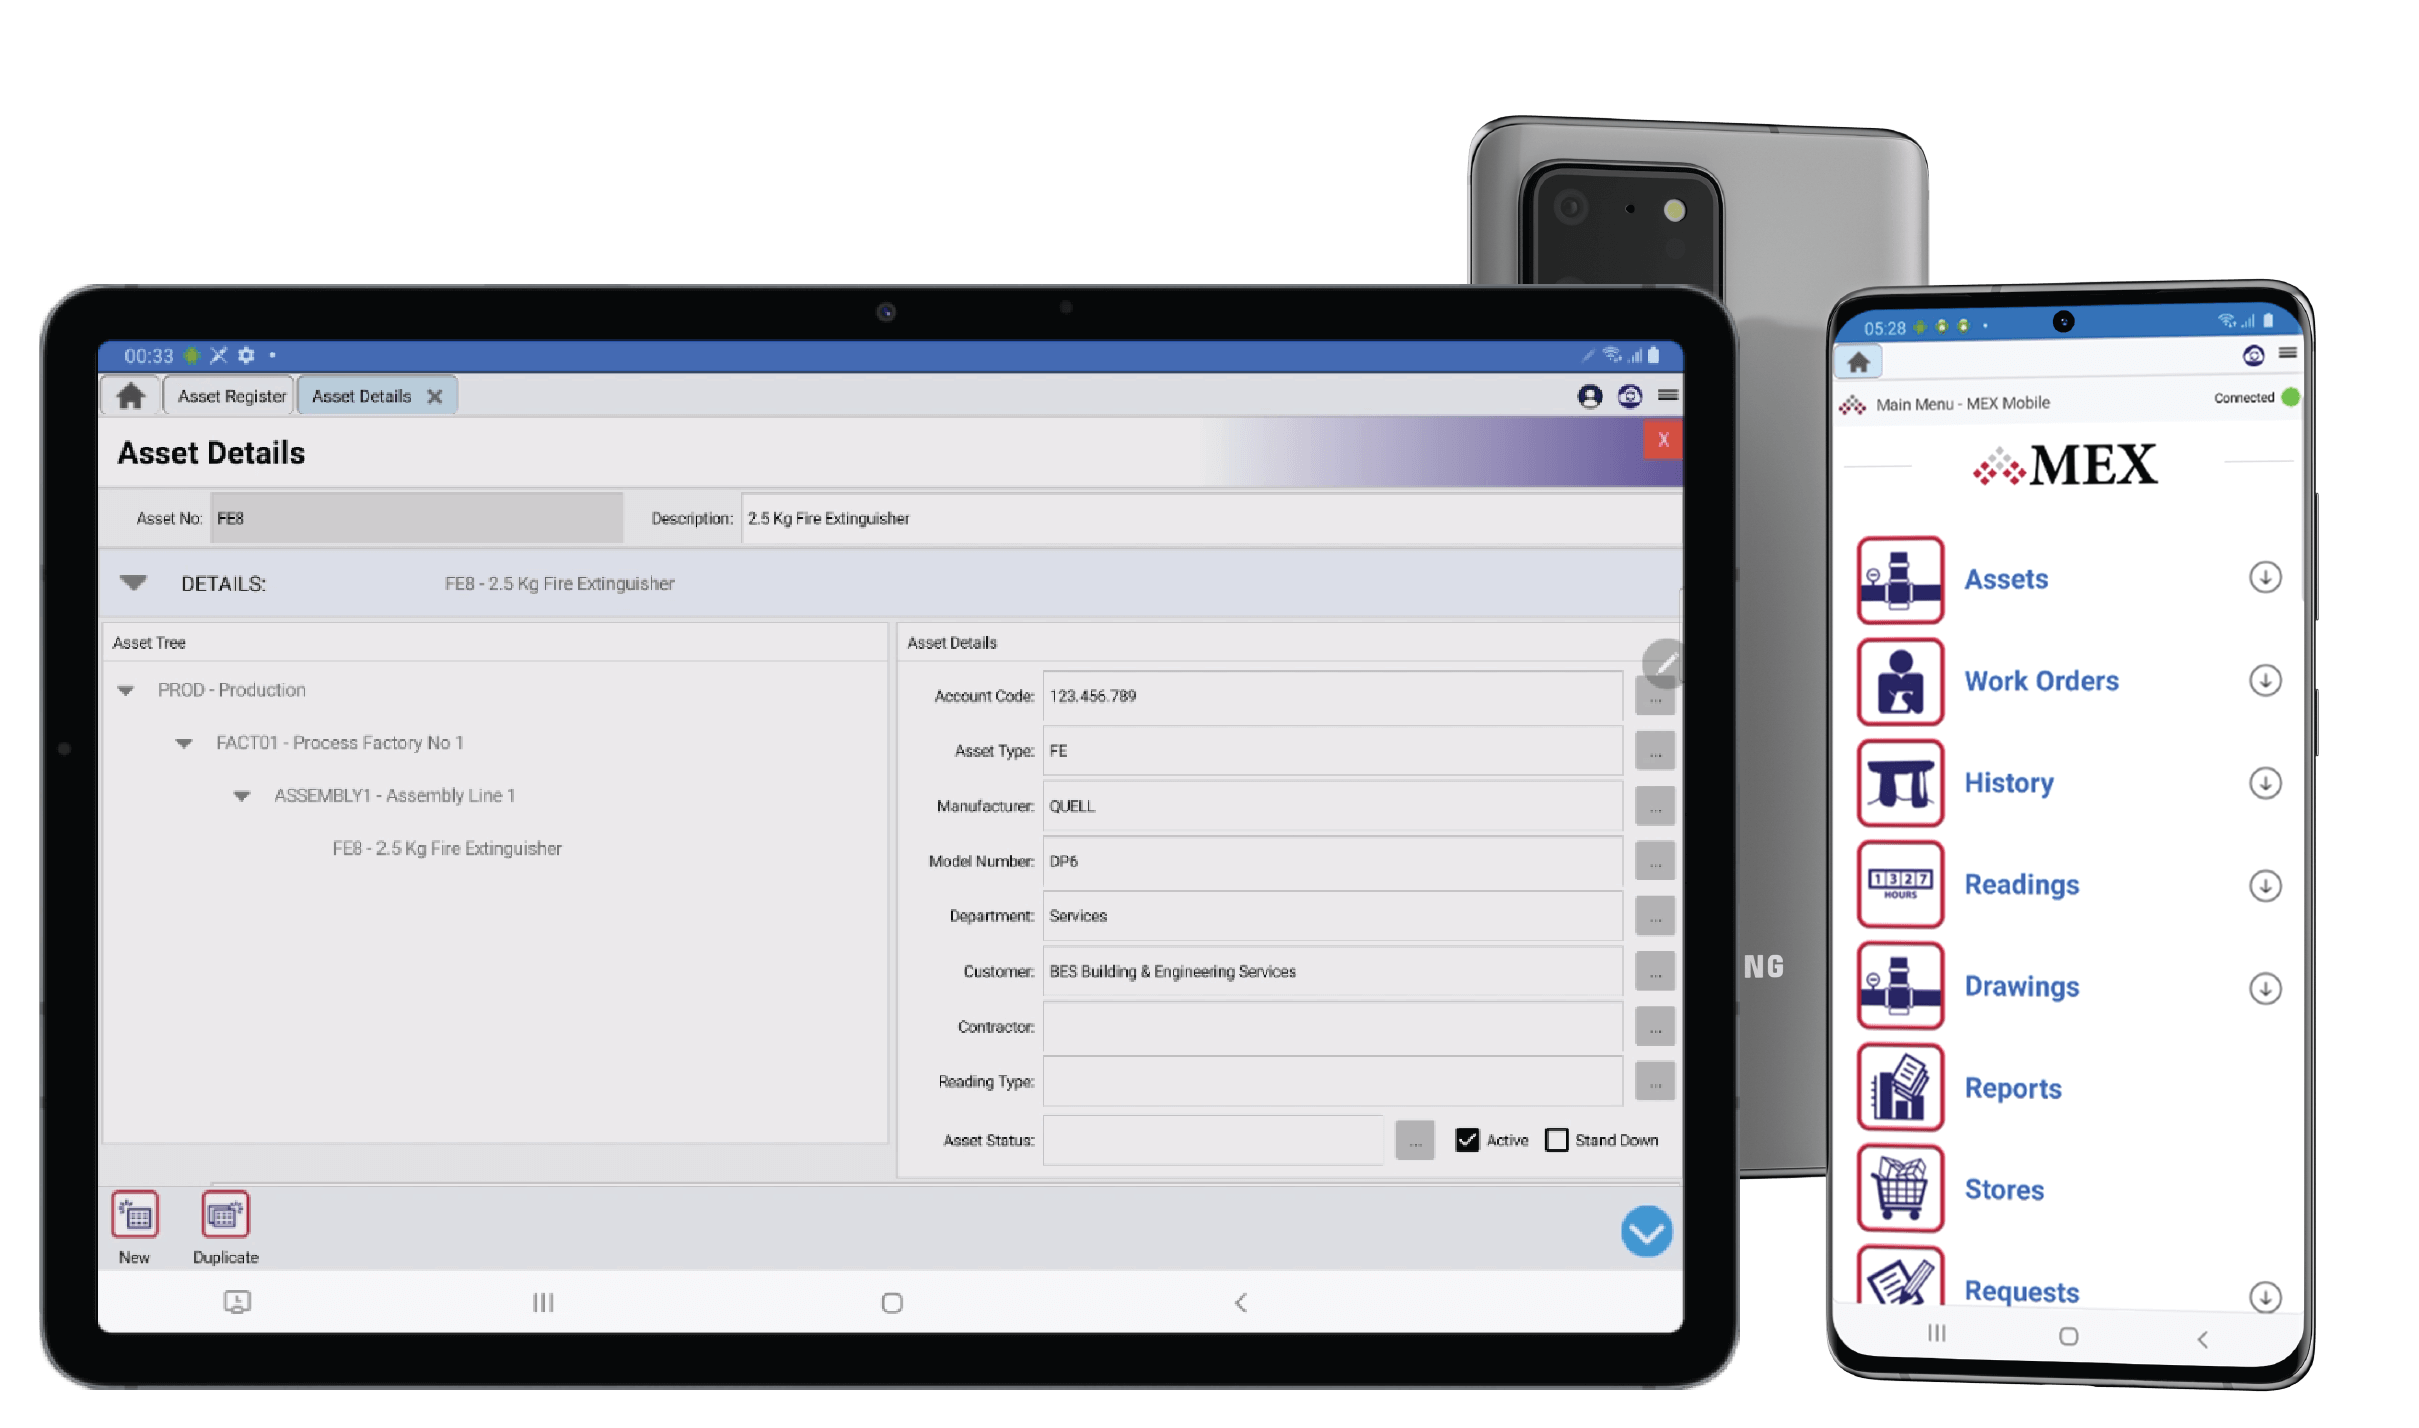 MEX Maintenance Software - Now available on Android Devices